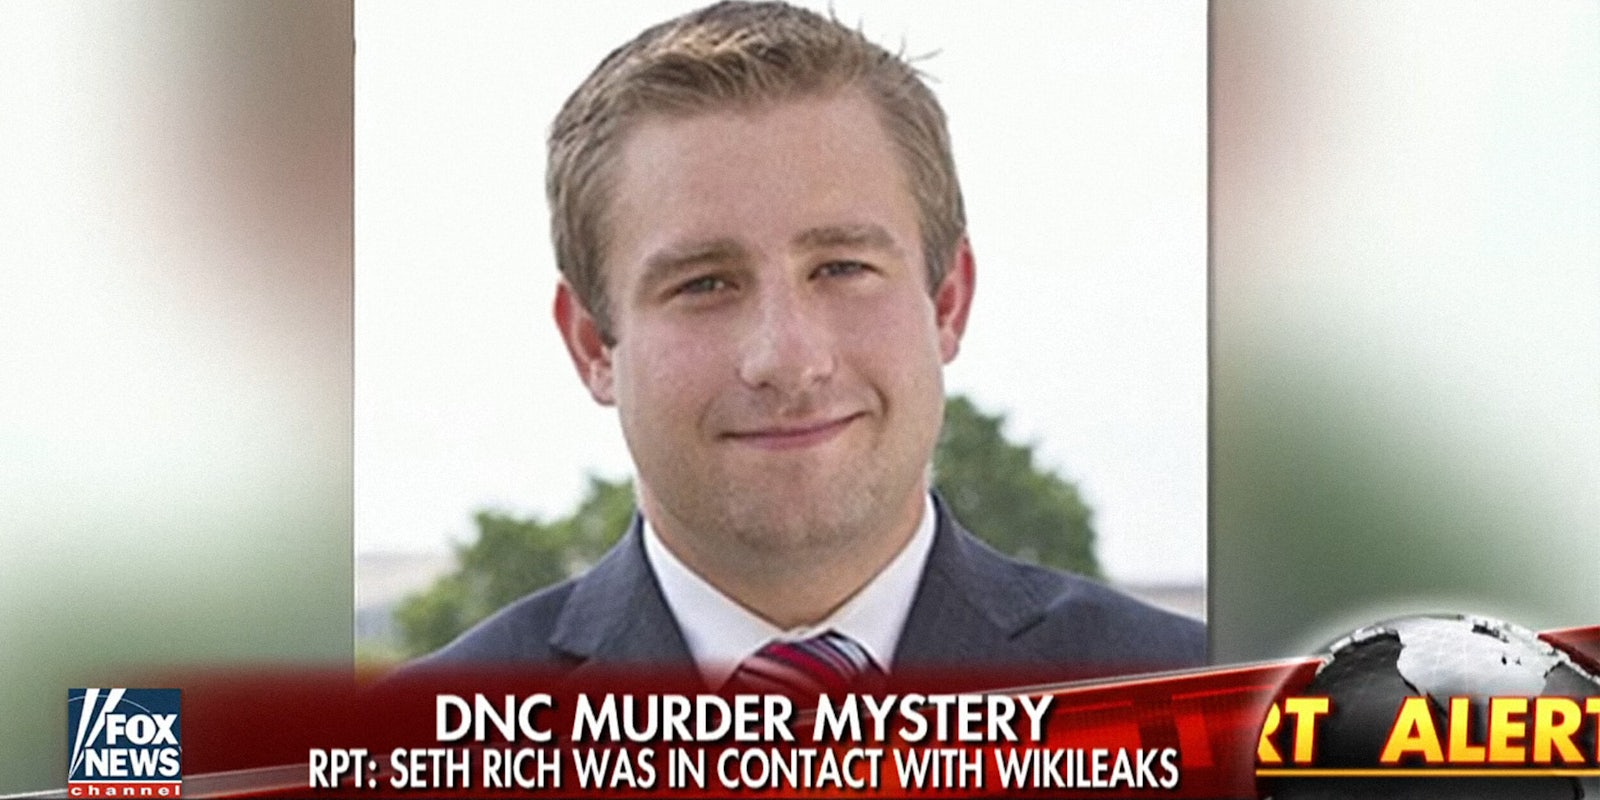 Trump Worked With Fox News On Debunked Seth Rich Murder Story Lawsuite Claims